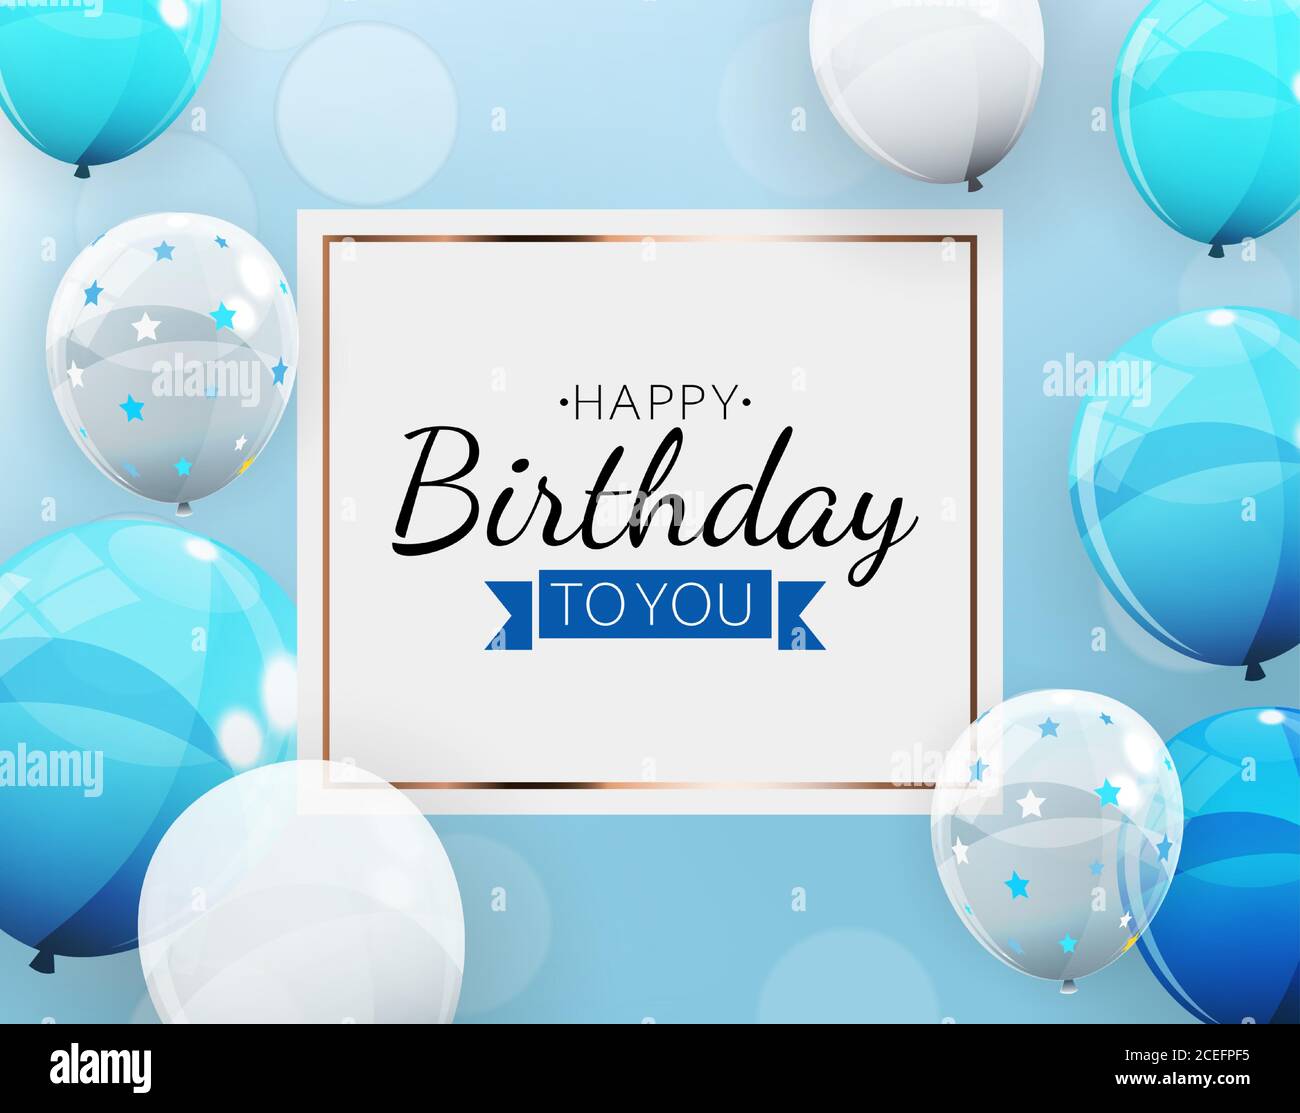 Happy Birthday Background with Balloons. Vector Illustration Stock ...